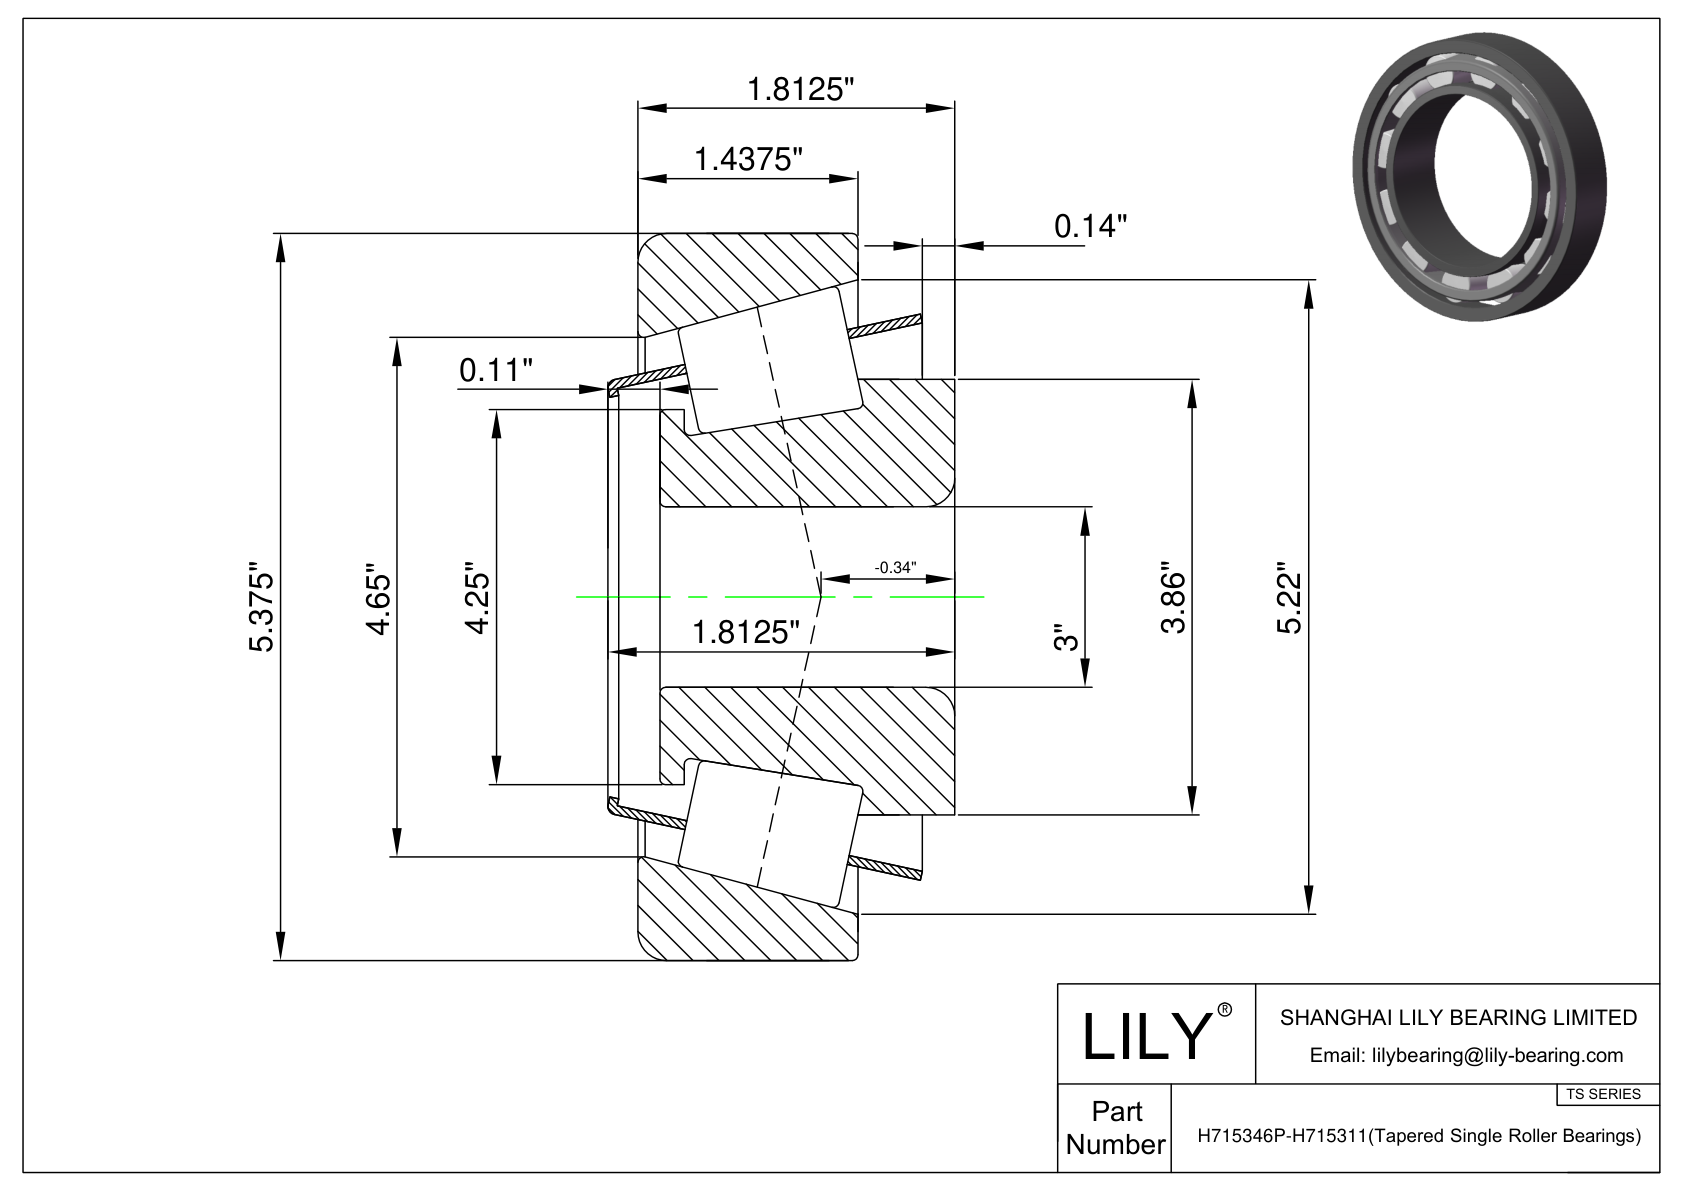 H715346P-H715311 TS (Tapered Single Roller Bearings) (Imperial) cad drawing